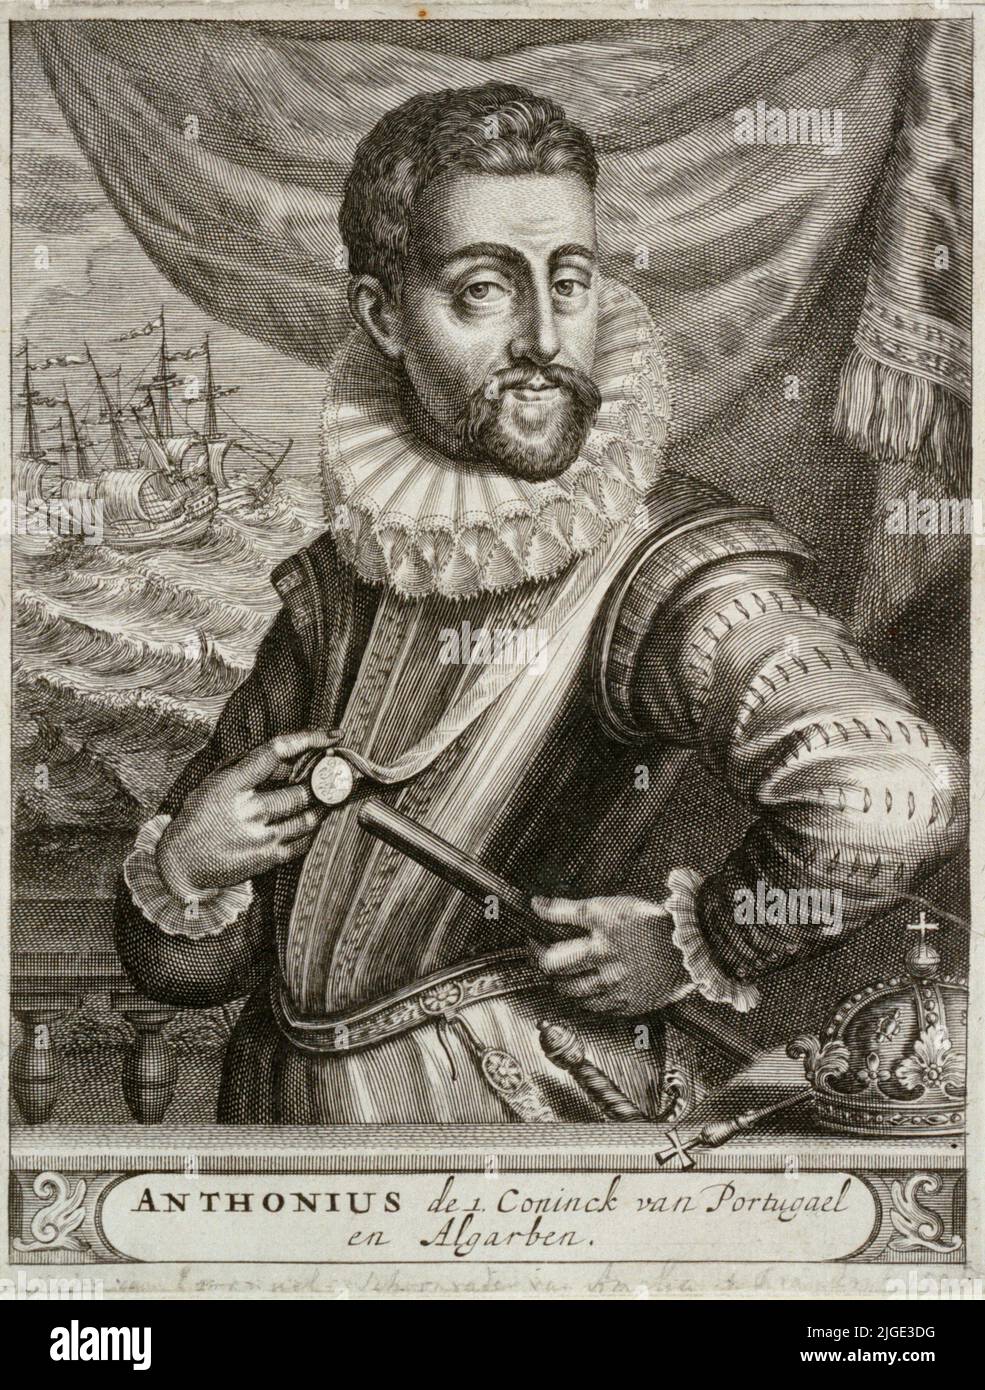 Portrait of Anthony I, King of Portugal and the Algarves wearing the medal of the Order of Aviz. The regal crown can be seen on the right hand side of the image. Two ships in a stormy sea are in the backgound.. Antonio was the illegitimate son of Prince Louis, Duke of Beja (1506?1555). After the death of the old Cardinal-King Henry, the throne was disputed by several claimants including Philip II of Spain. Antonio, relying on the popular hostility to a Spanish ruler, presented himself as an alternative candidate. He proclaimed himself King of Portugal in Santarem on 24 July 1580. However, he g Stock Photo